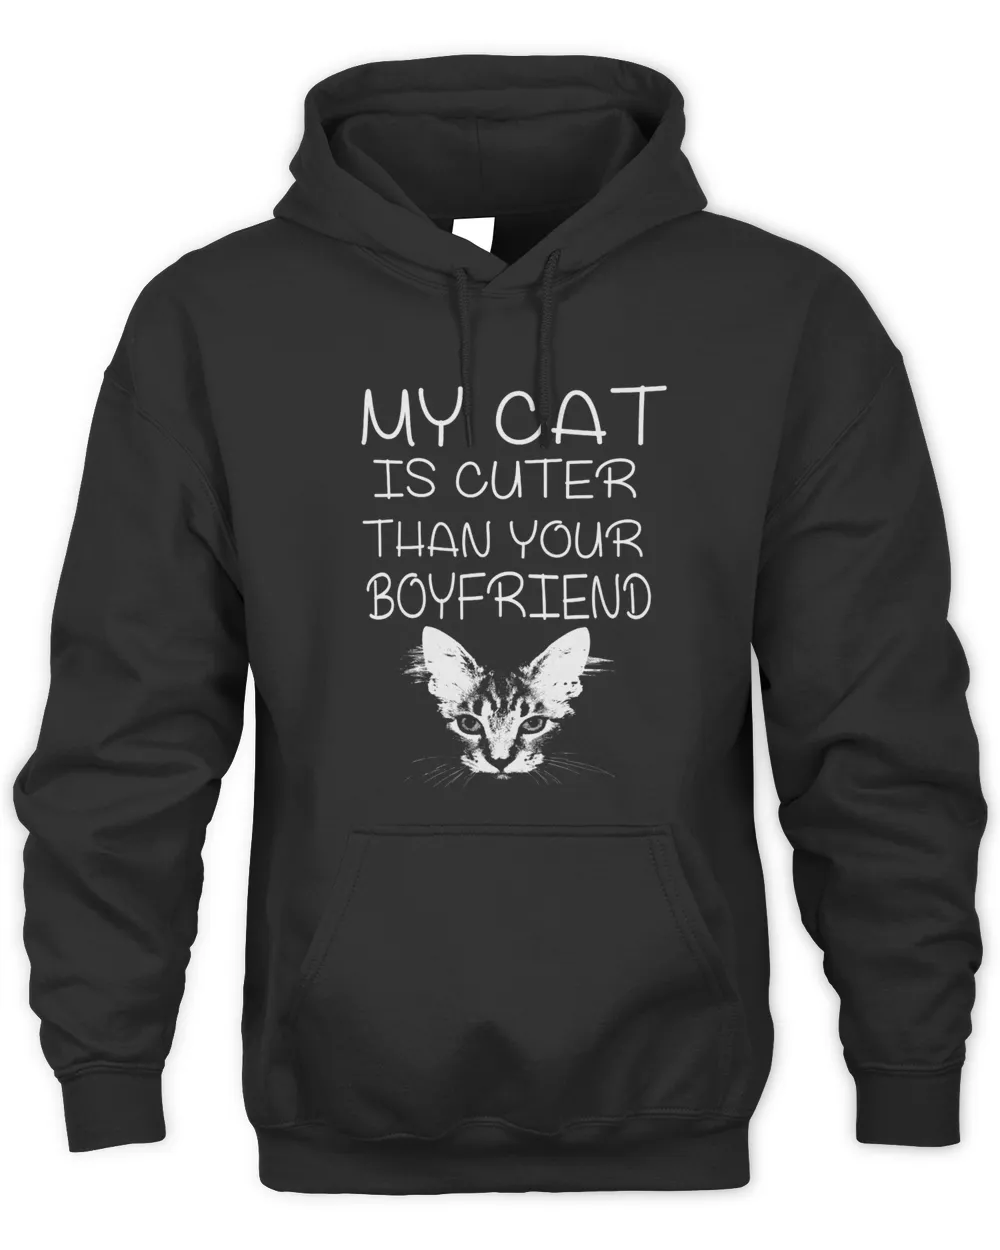 My Cat Is Cuter Than Your Boyfriend Hoodie